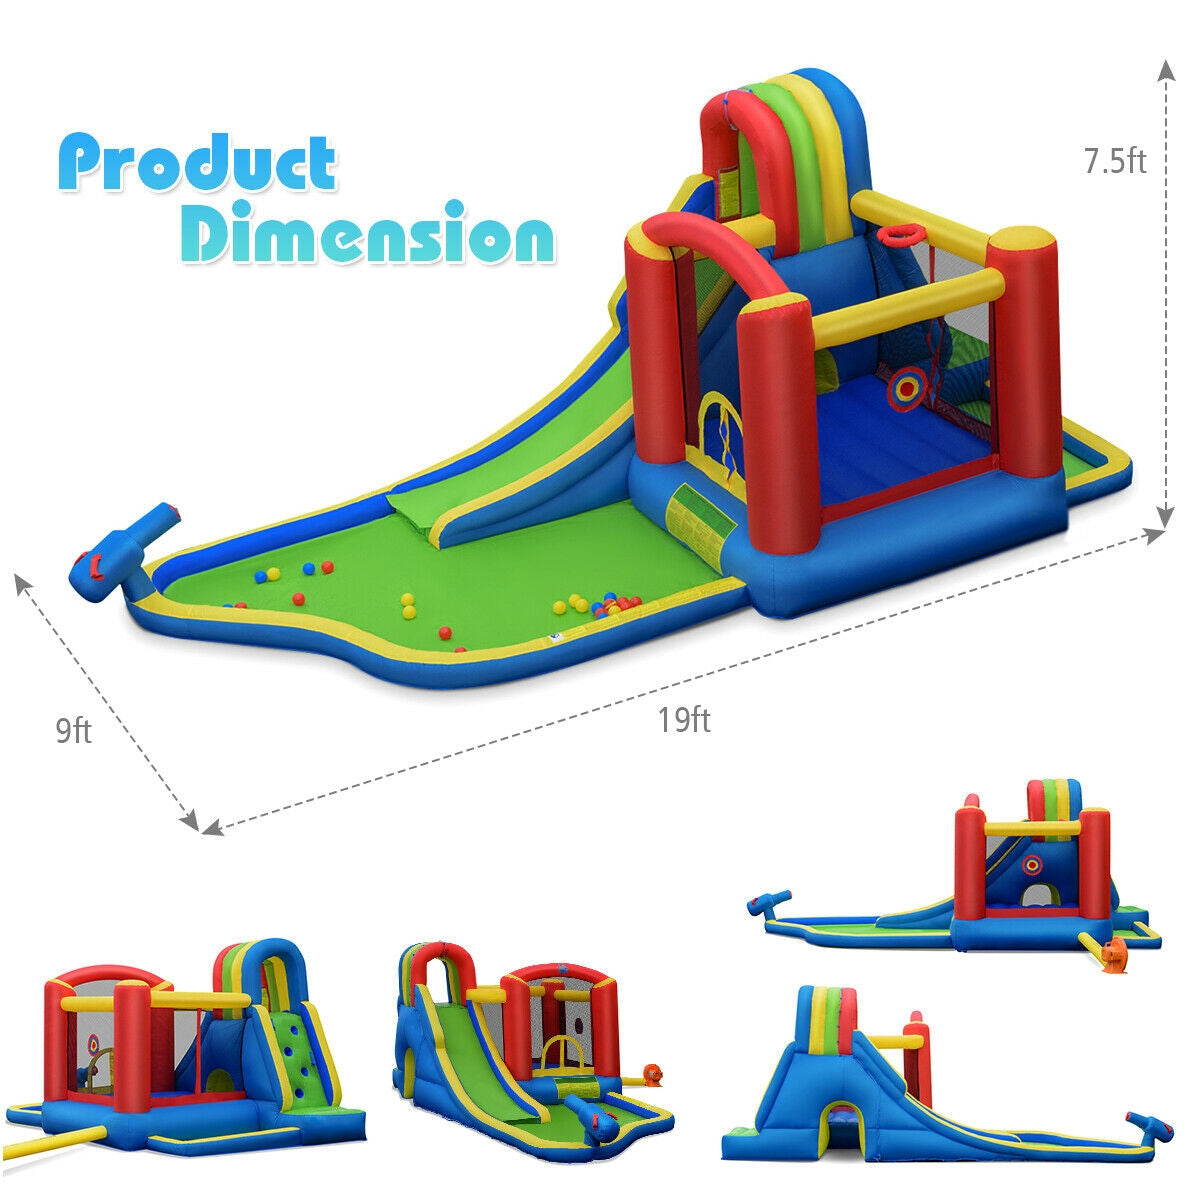 Detailed Product Information: When fully inflated, the bounce house measures 19 ft (L) x 9 ft (D) x 7.5 ft (H). It comes with a 740W air blower, a hose, a repair kit, a carrying bag, 2 Velcro balls, 30 ball pits, and 7 stakes. The recommended age for children to enjoy this bounce house is between 3 to 10 years old.